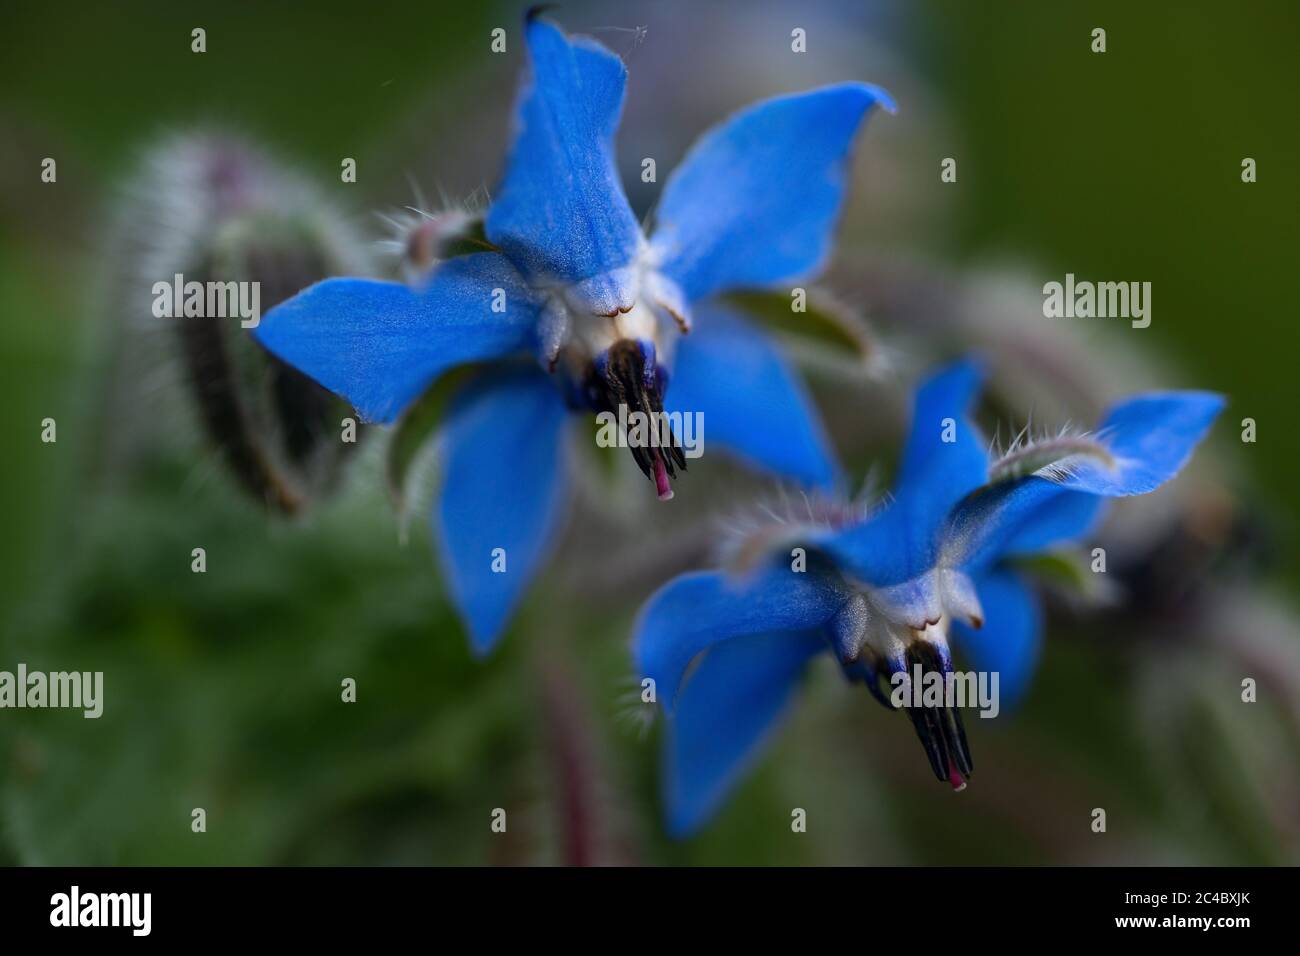 Blue blossoms of starflower (Borago officinalis) Mediterranean herb, the flowers produce copious nectar while blooming and are attractive for bees, bl Stock Photo